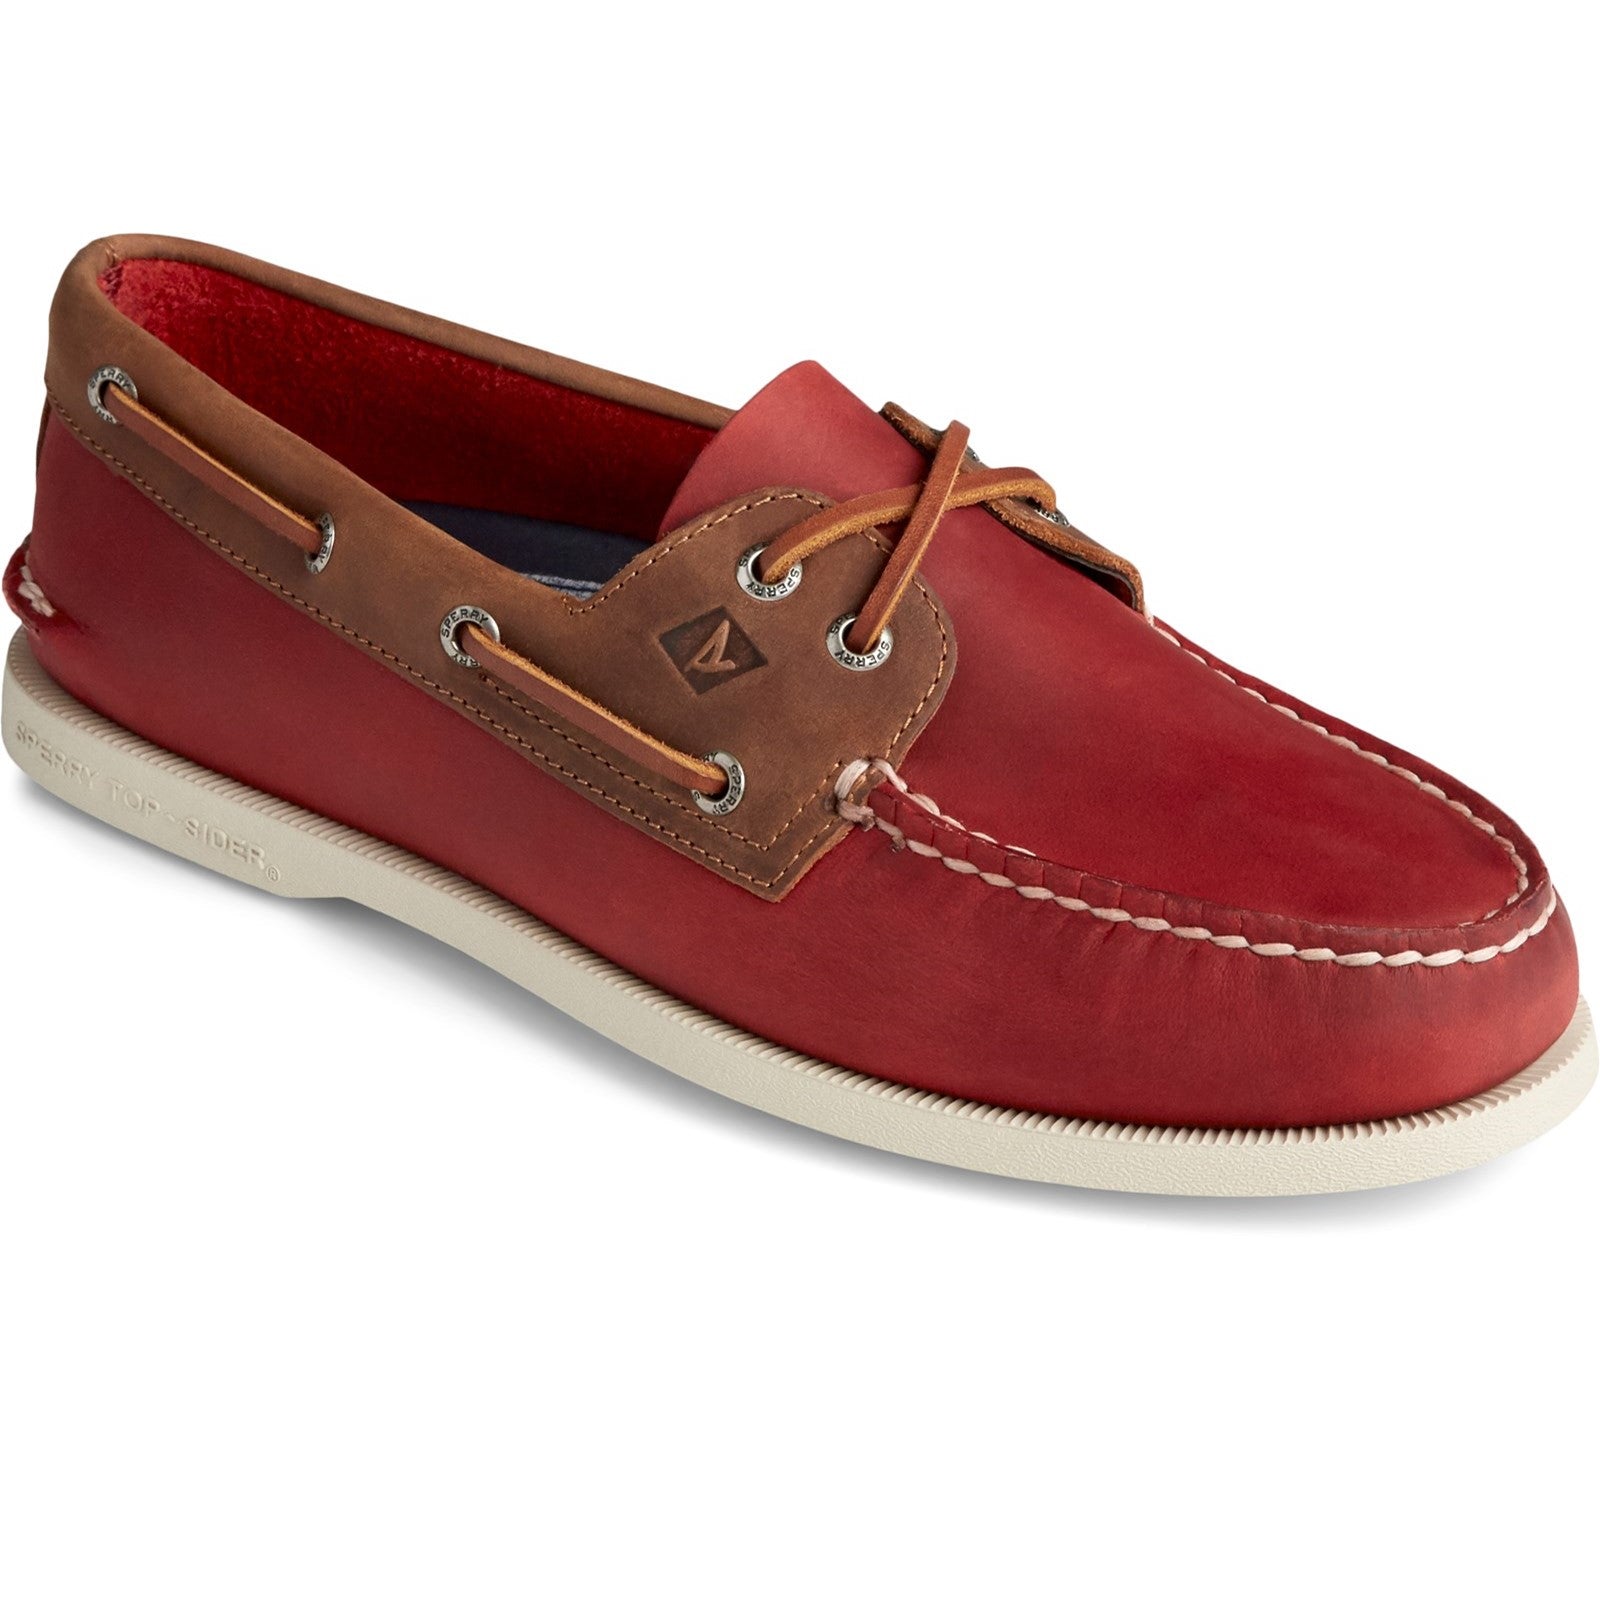 Sperry Top-sider Authentic Original Boat Shoe